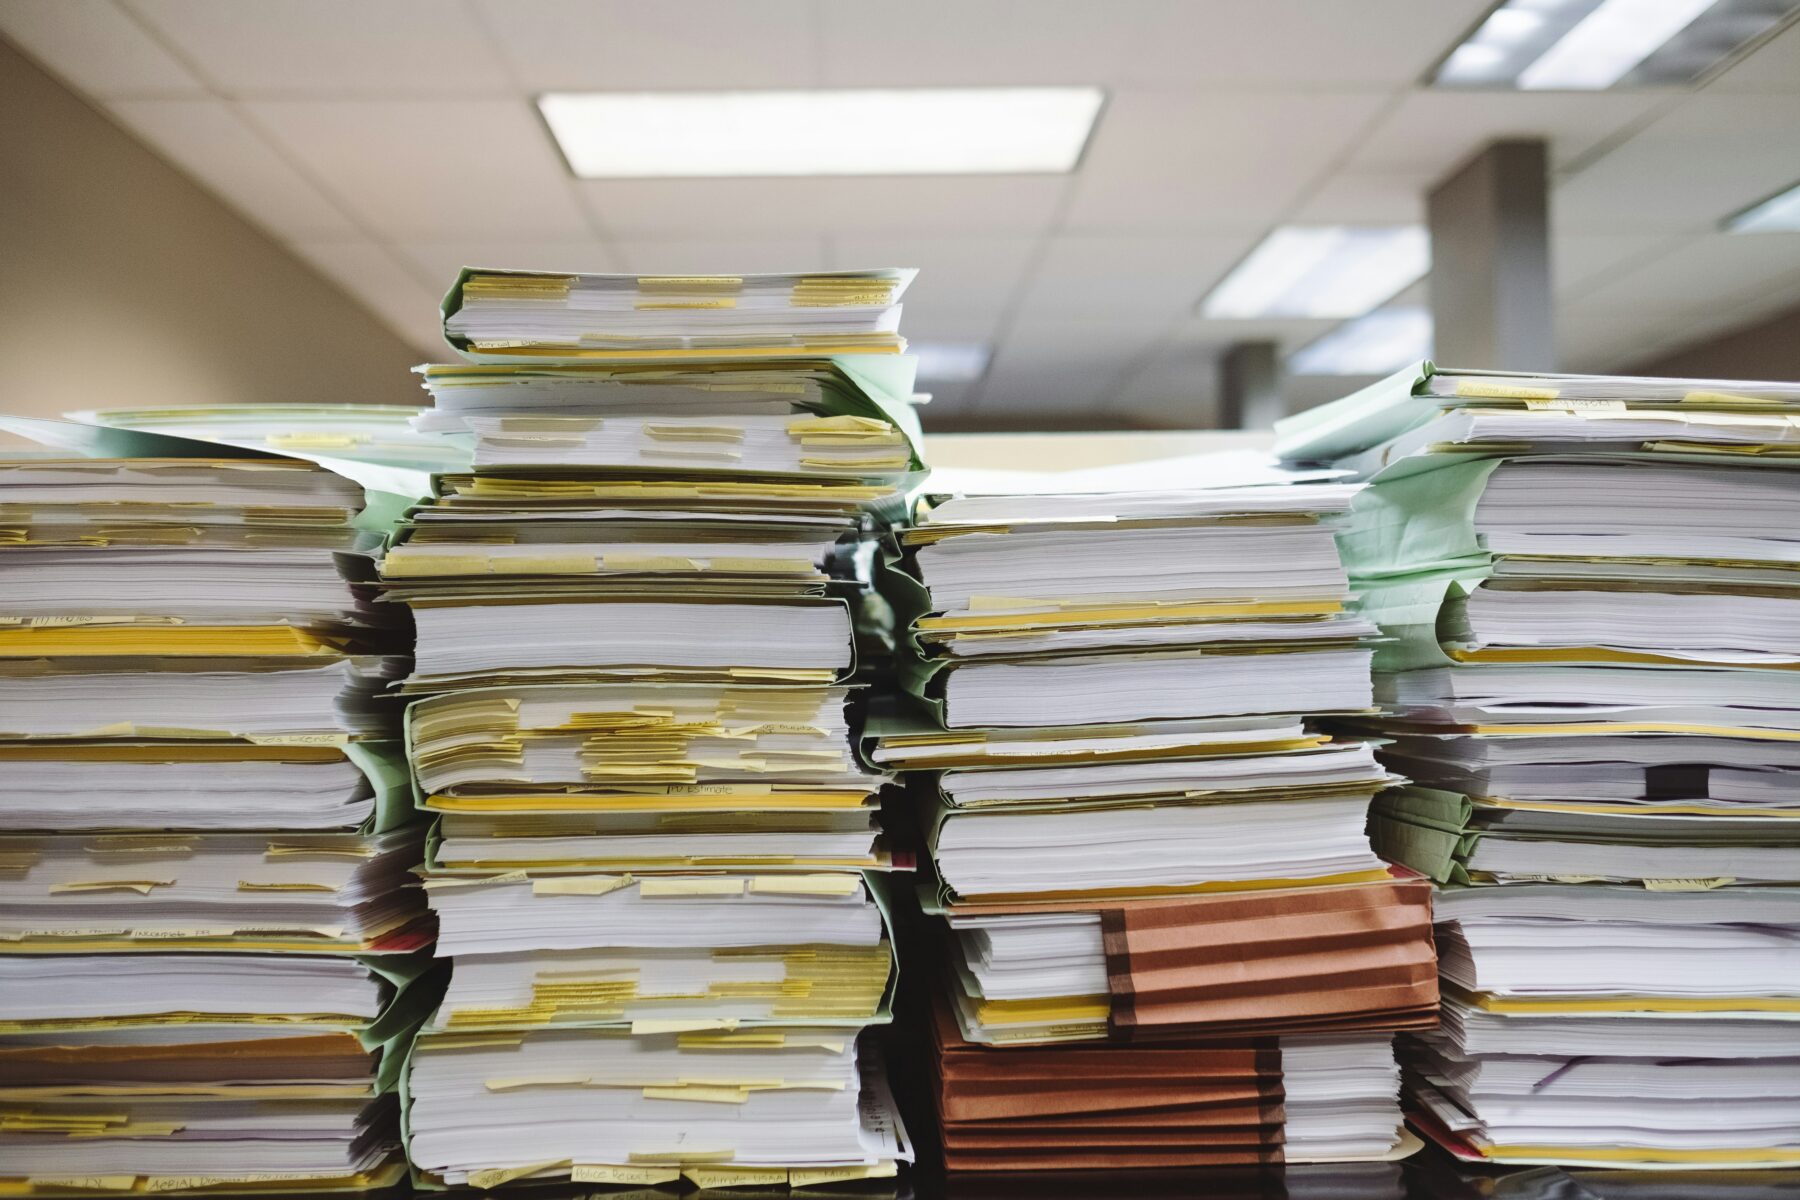 piles of documents stalked on top of each other in an office environment